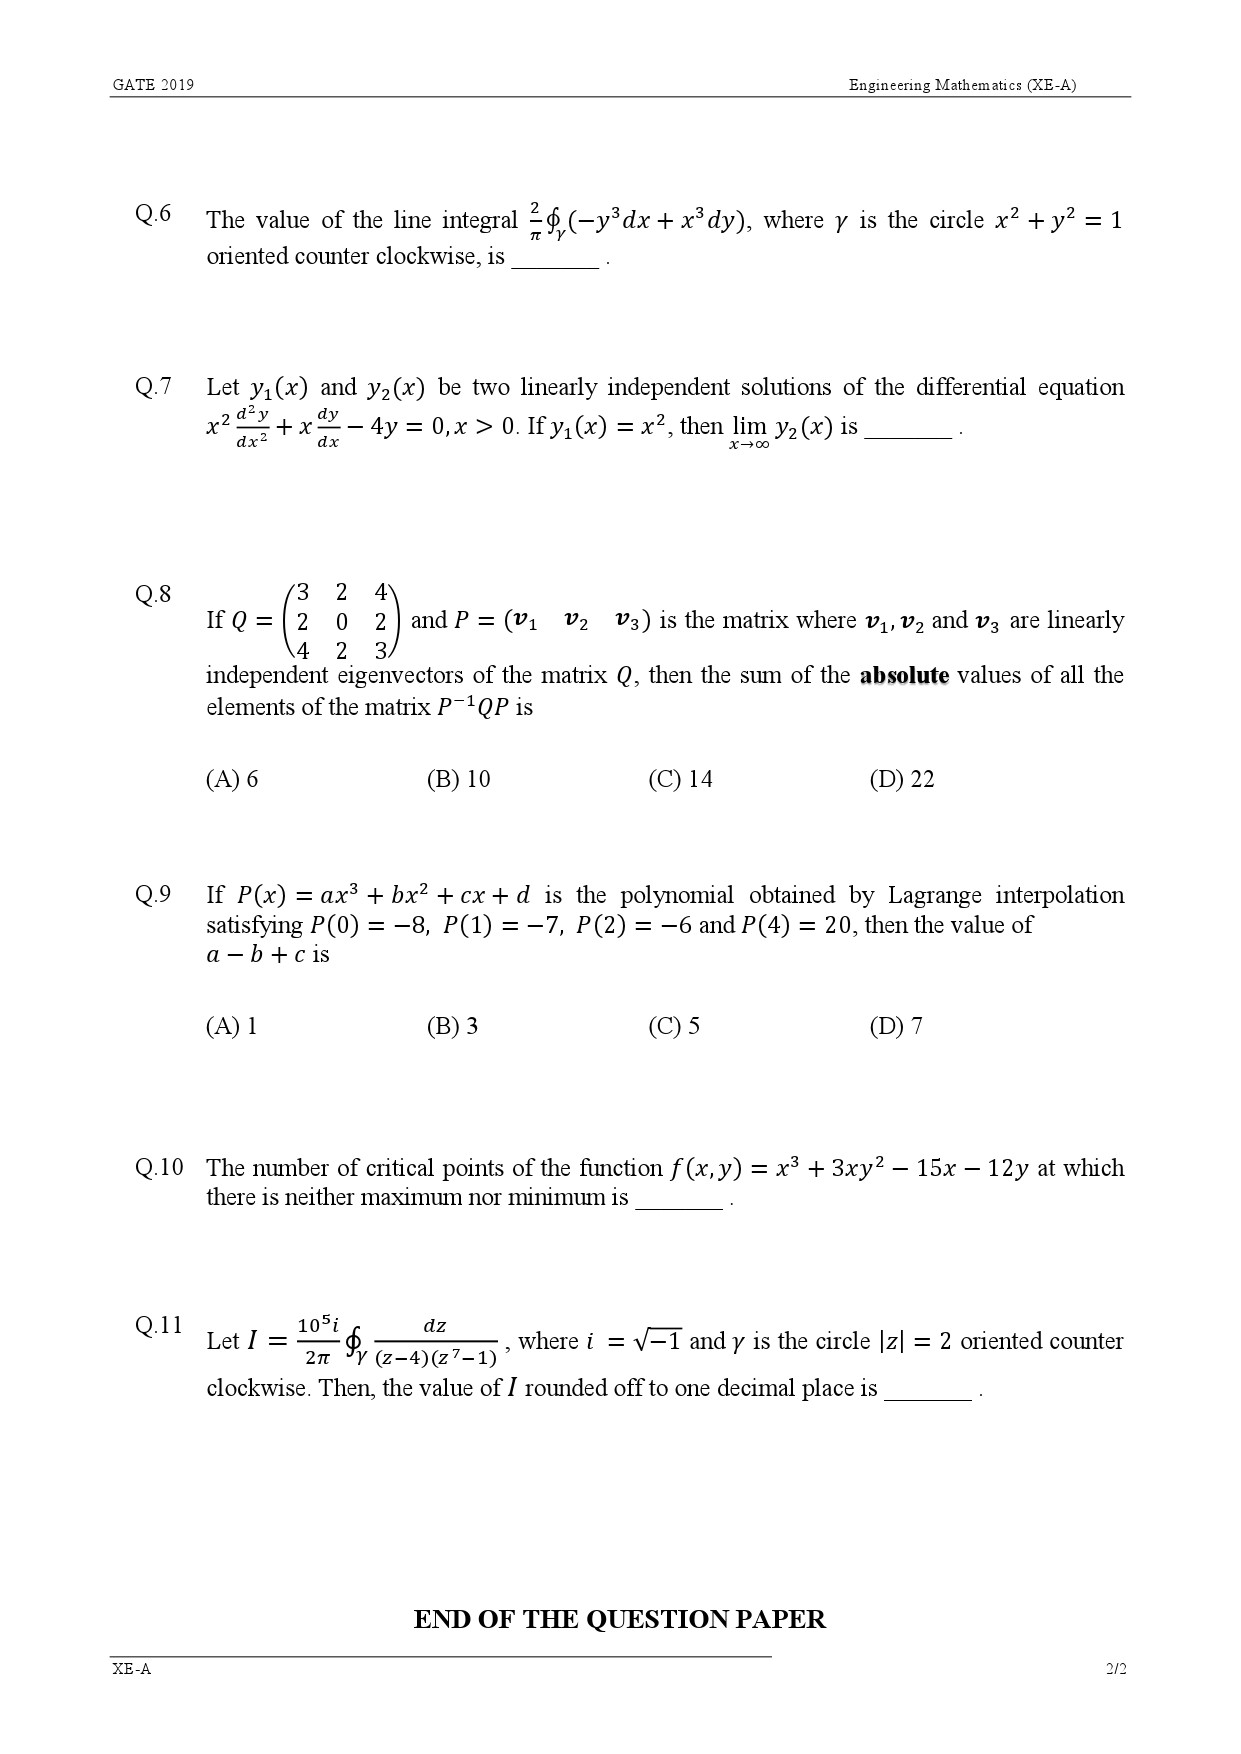 GATE Exam Question Paper 2019 Engineering Sciences 5